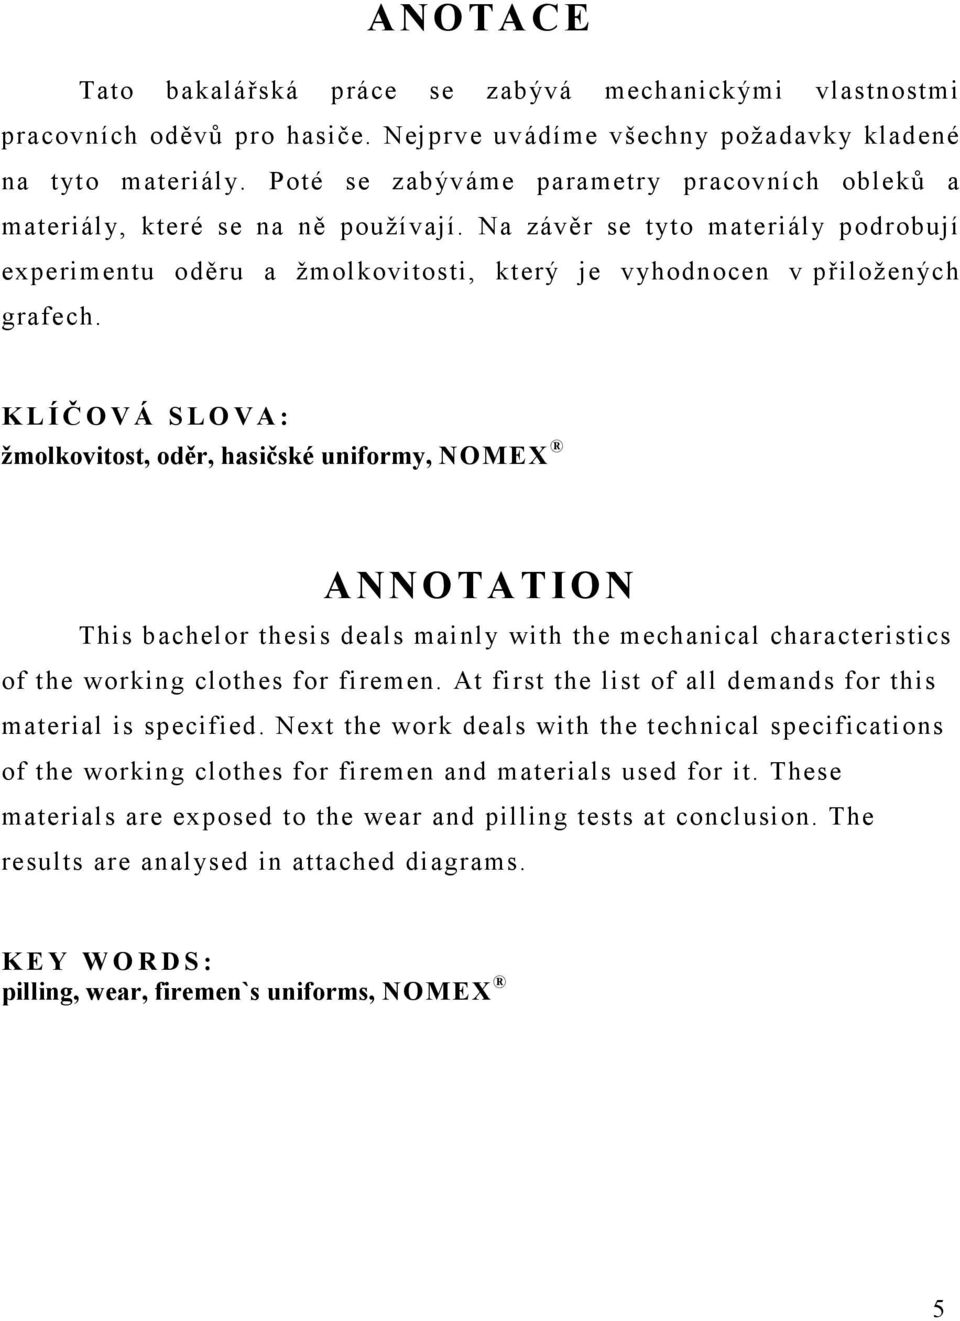 K L Í Č O V Á S L O V A : žmolkovitost, oděr, hasičské uniformy, NOMEX ANNOTATION This bachelor thesis deals mainly with the mechanical characteristics of the working clothes for firemen.